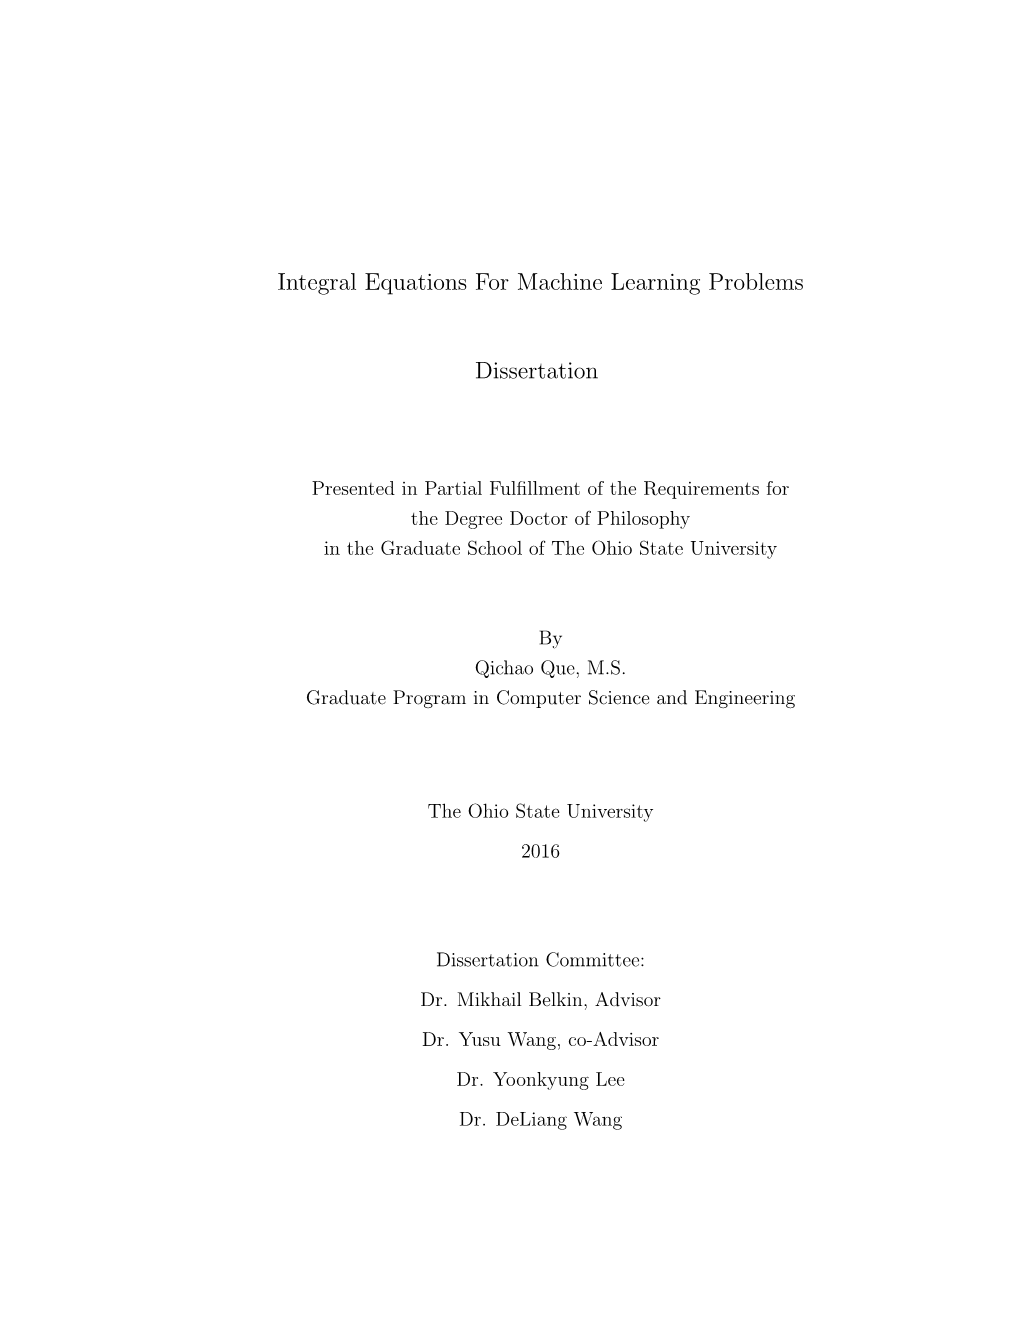 Integral Equations for Machine Learning Problems